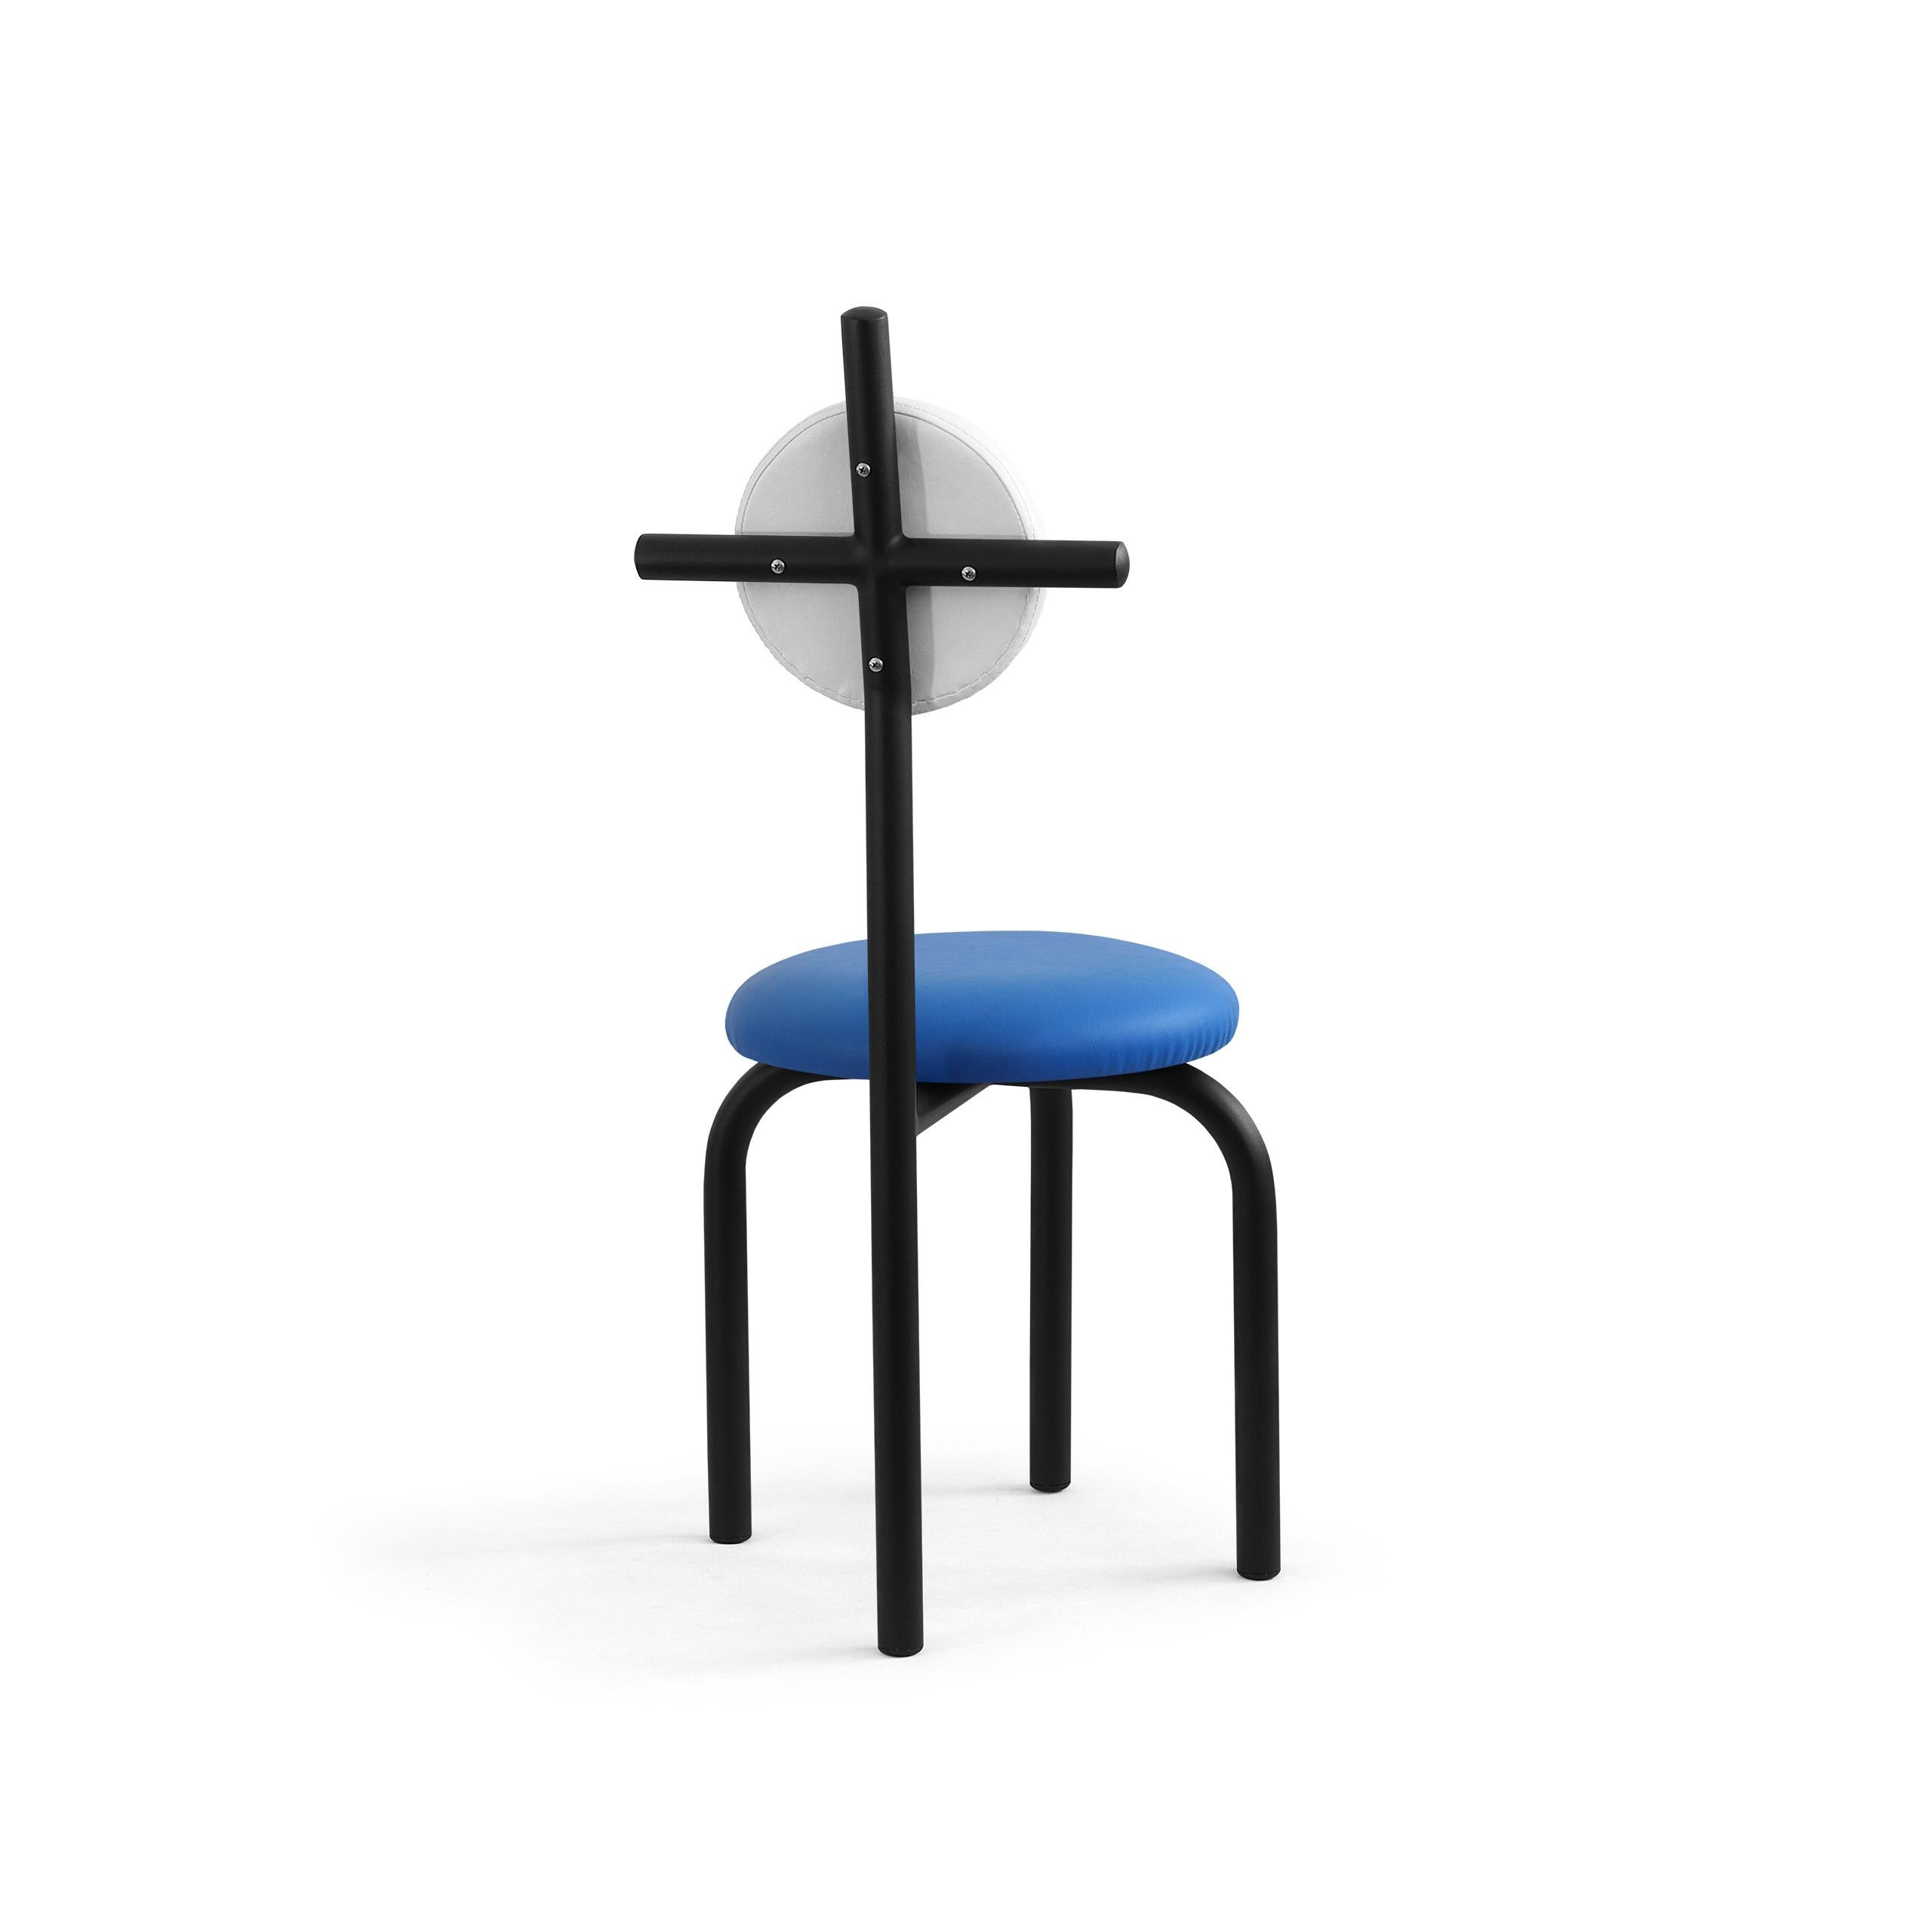 PK16 Impermeable Chair, Blue Seat & Carbon Steel Structure by Paulo Kobylka In New Condition For Sale In Londrina, Paraná